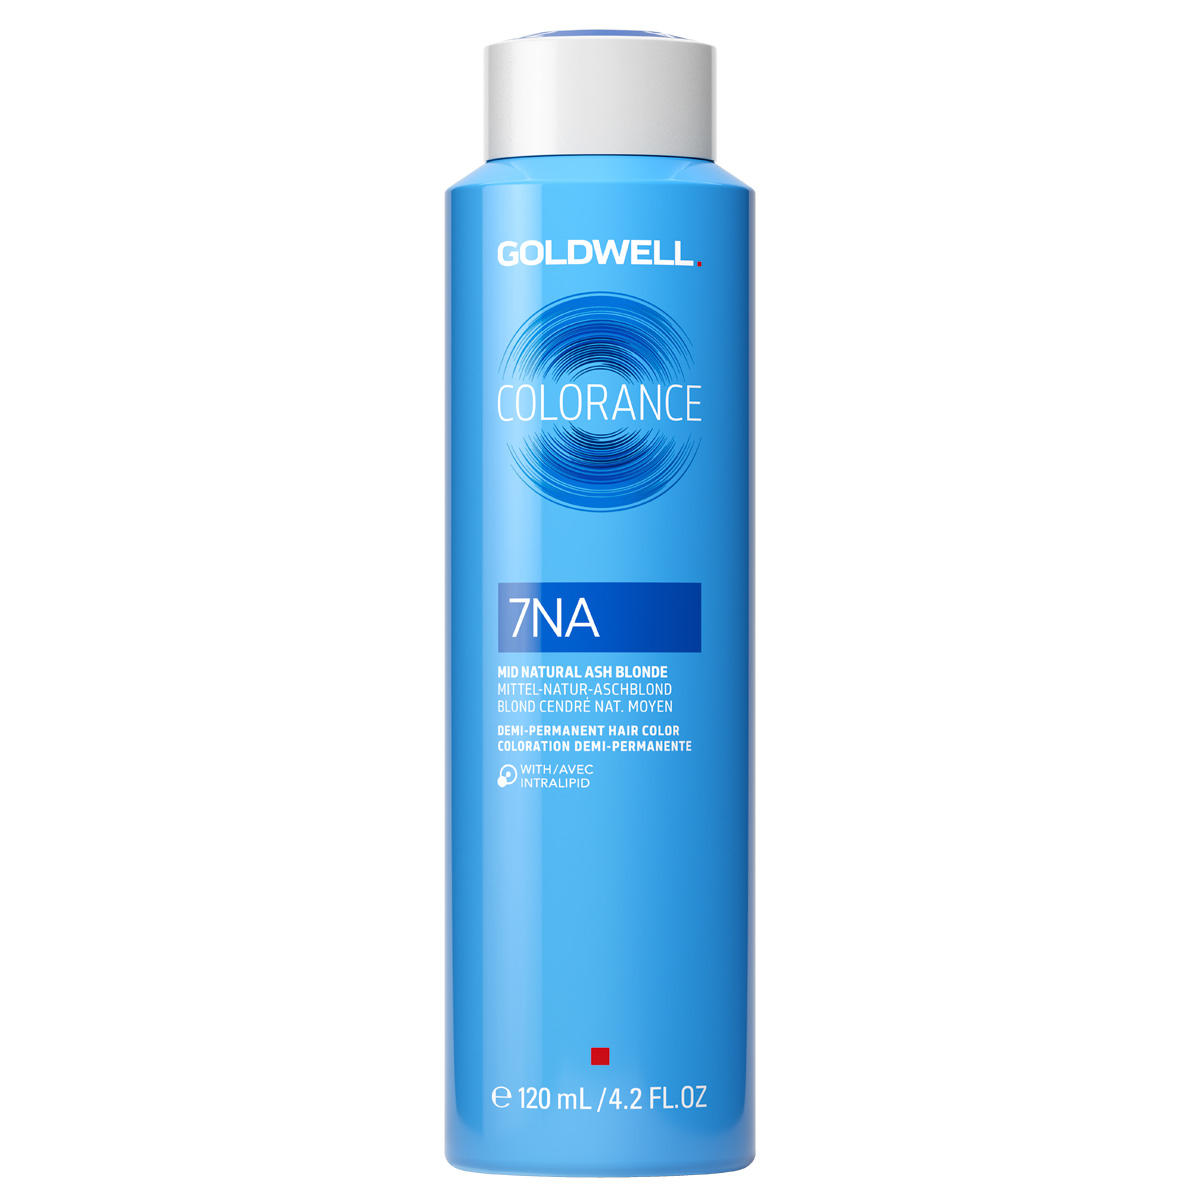 Goldwell Colorance Demi-Permanent Hair Color 7NA Mittel-Natur-Aschblond 120 ml - 1